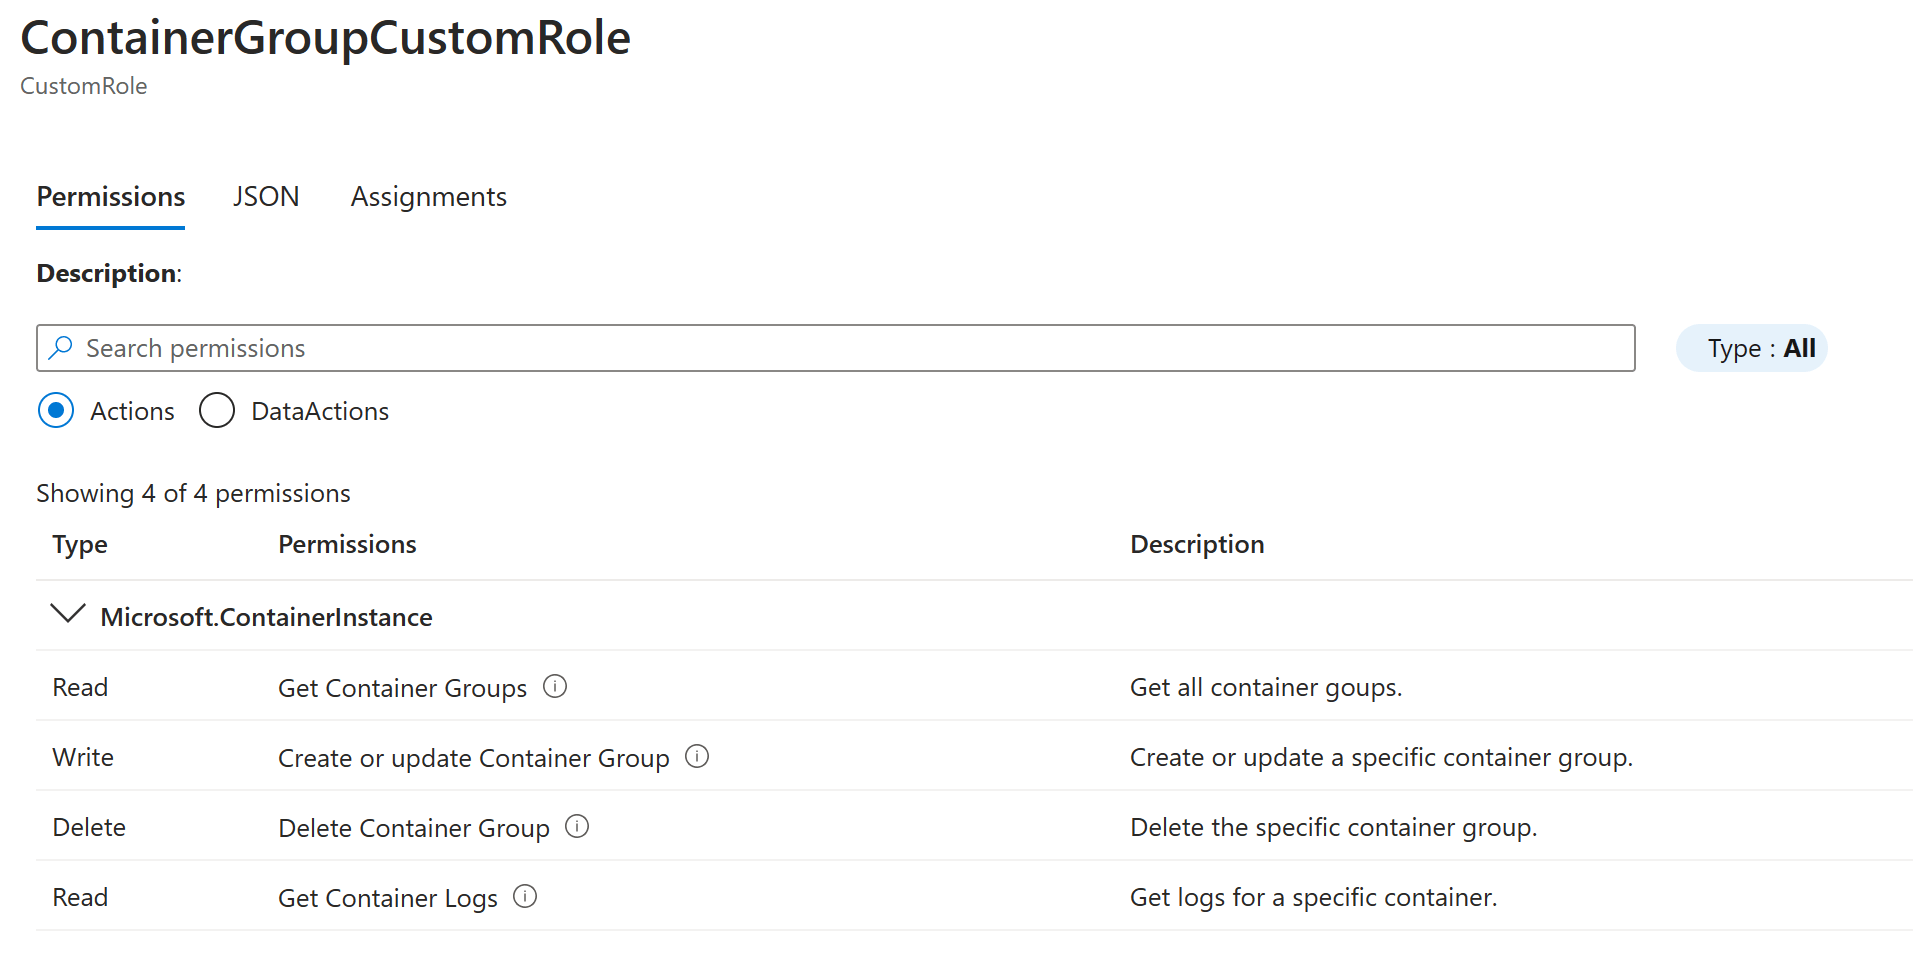 Image showing a custom role and the permissions